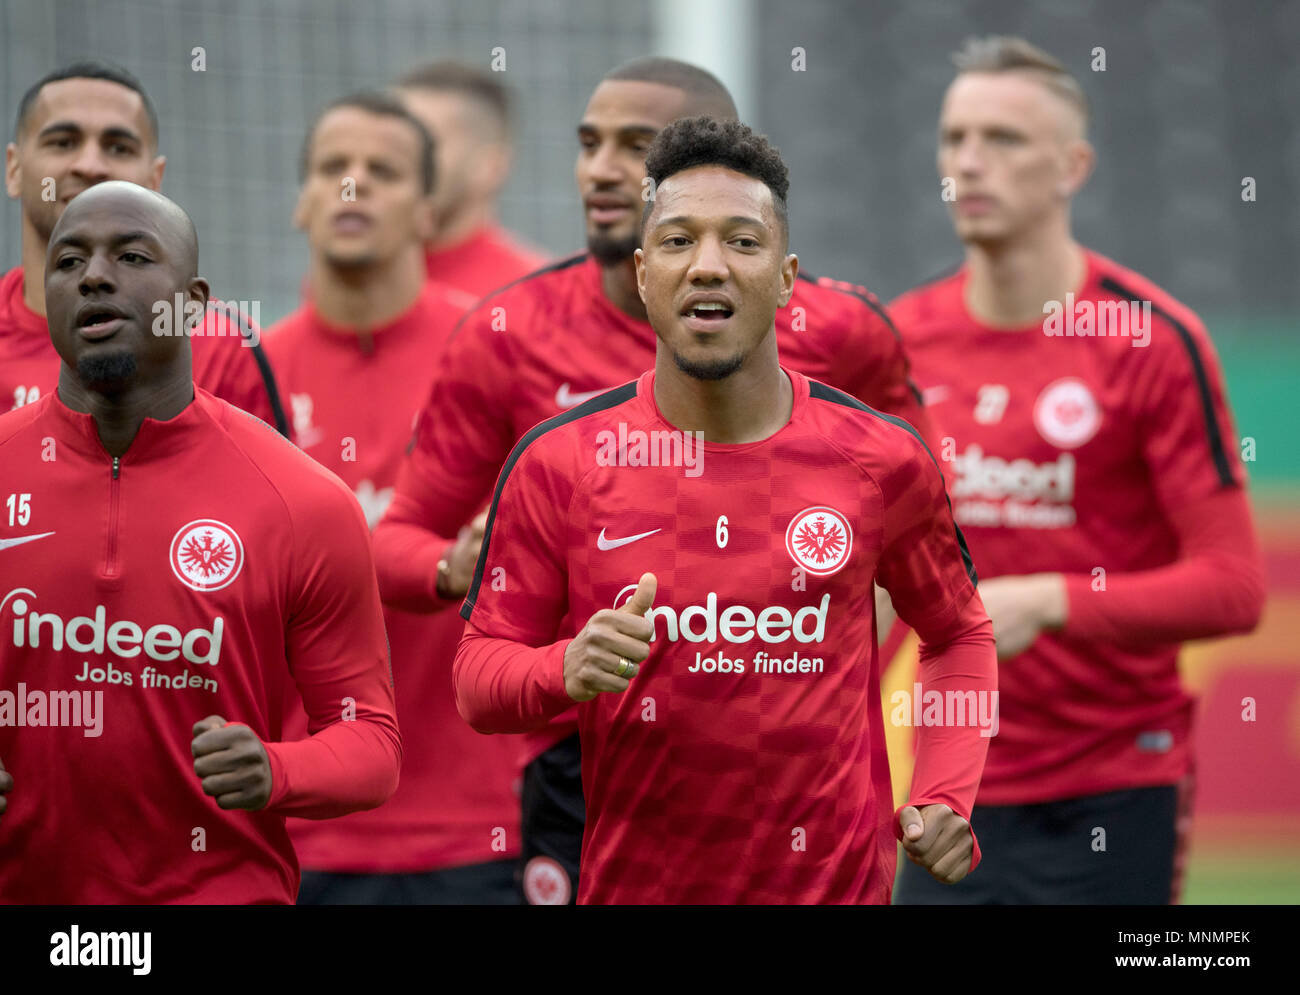 18 May 2018, Germany, Berlin: Jetro Willems (l) and Jonathan de Guzman of Eintracht Frankfurt pictured during a training session at the Olympic stadium. The team is training ahead of Saturday's German DFB Cup final between FC Bayern Munich and Eintracht Frankfurt. Photo: Soeren Stache/dpa Stock Photo